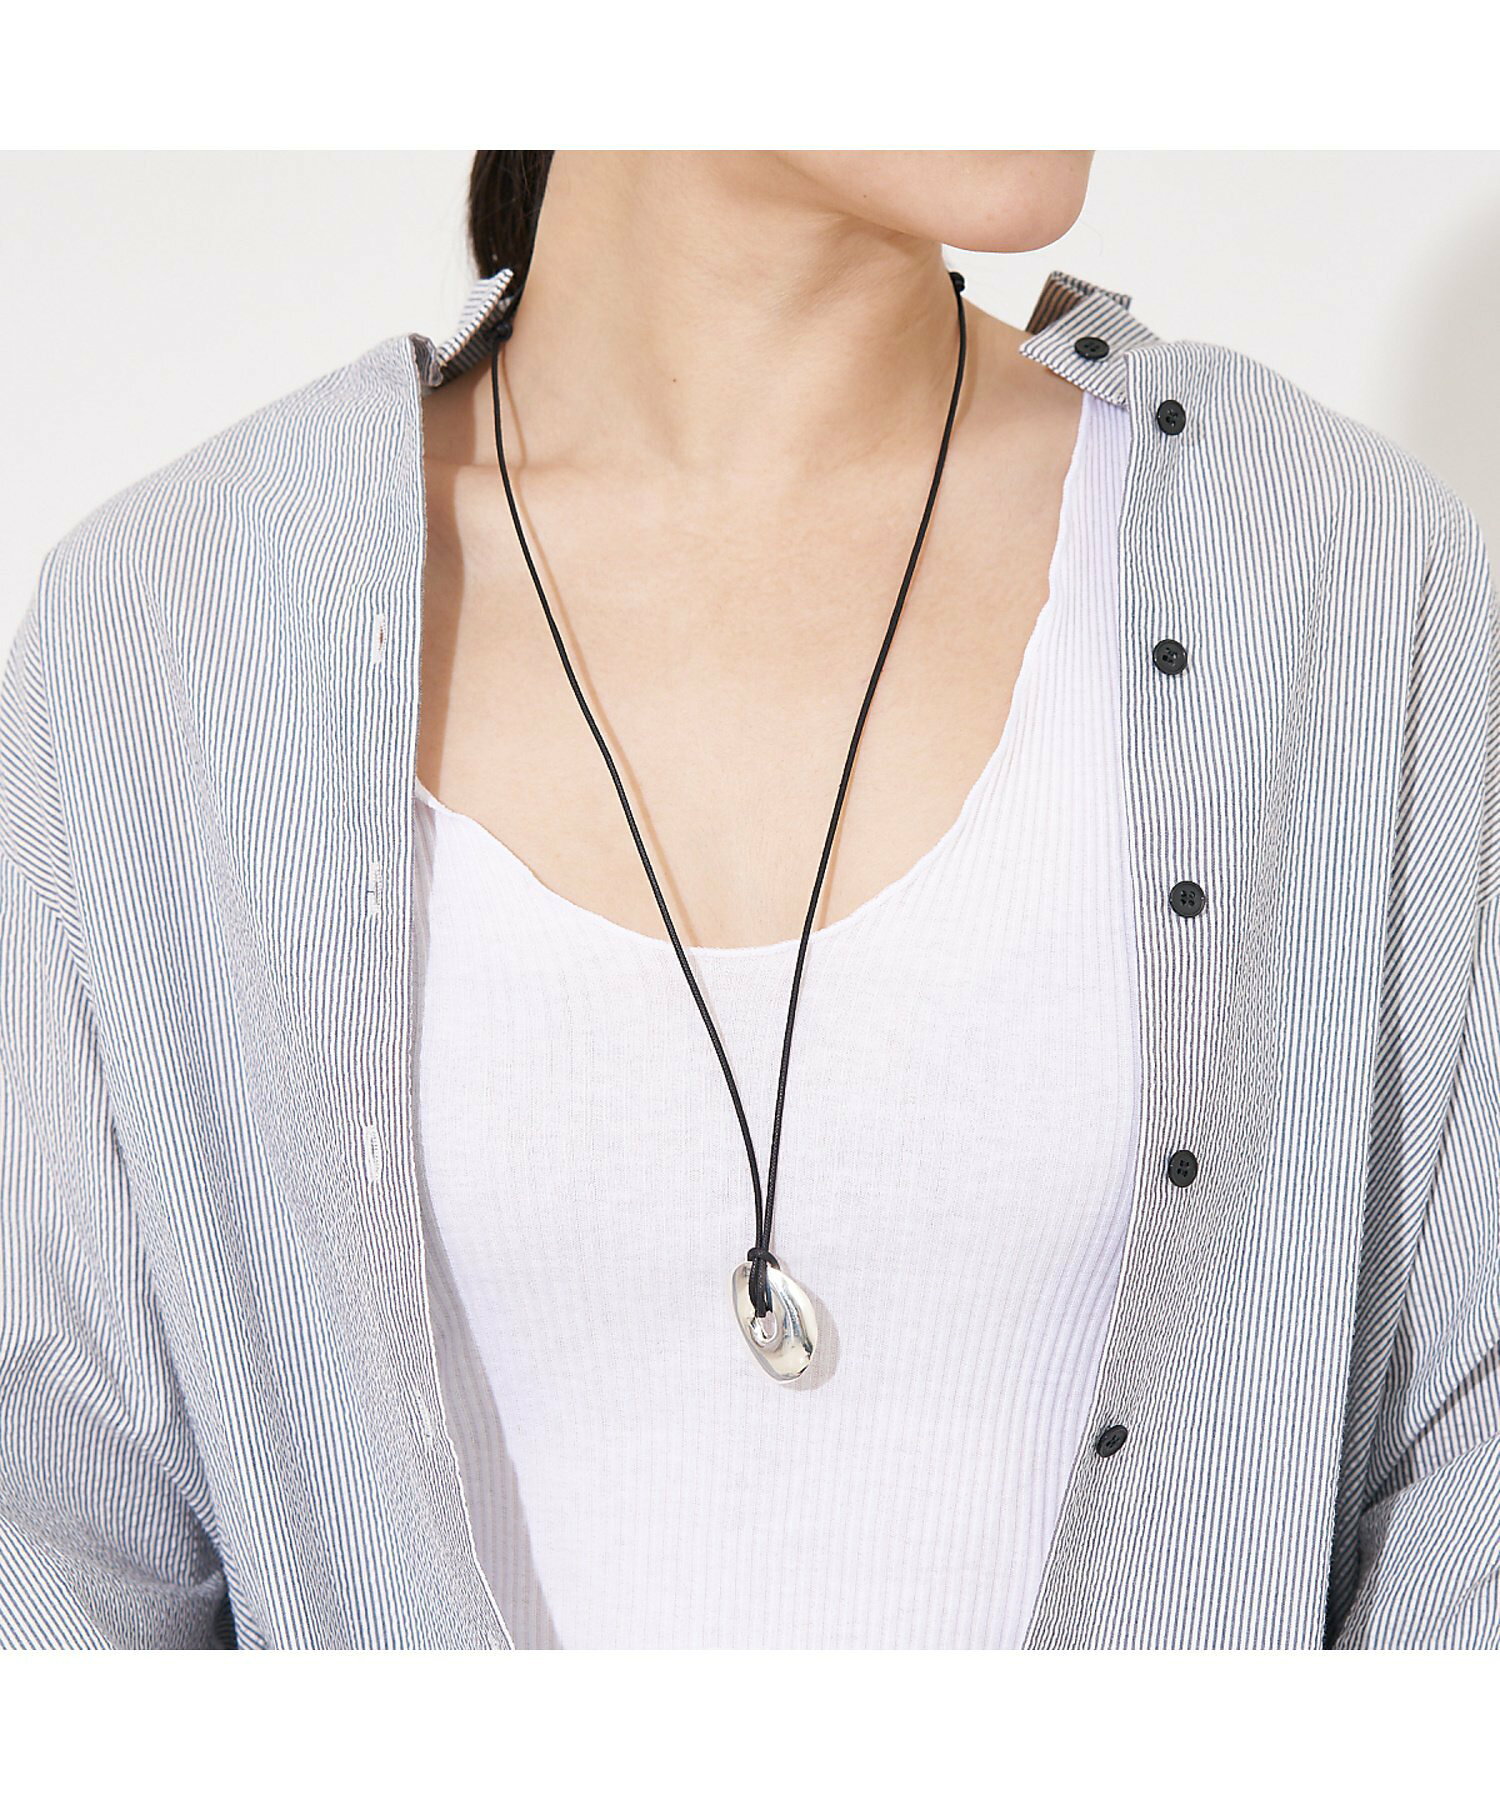 【Lemme./レム】 Curvature Necklace コードネックレス